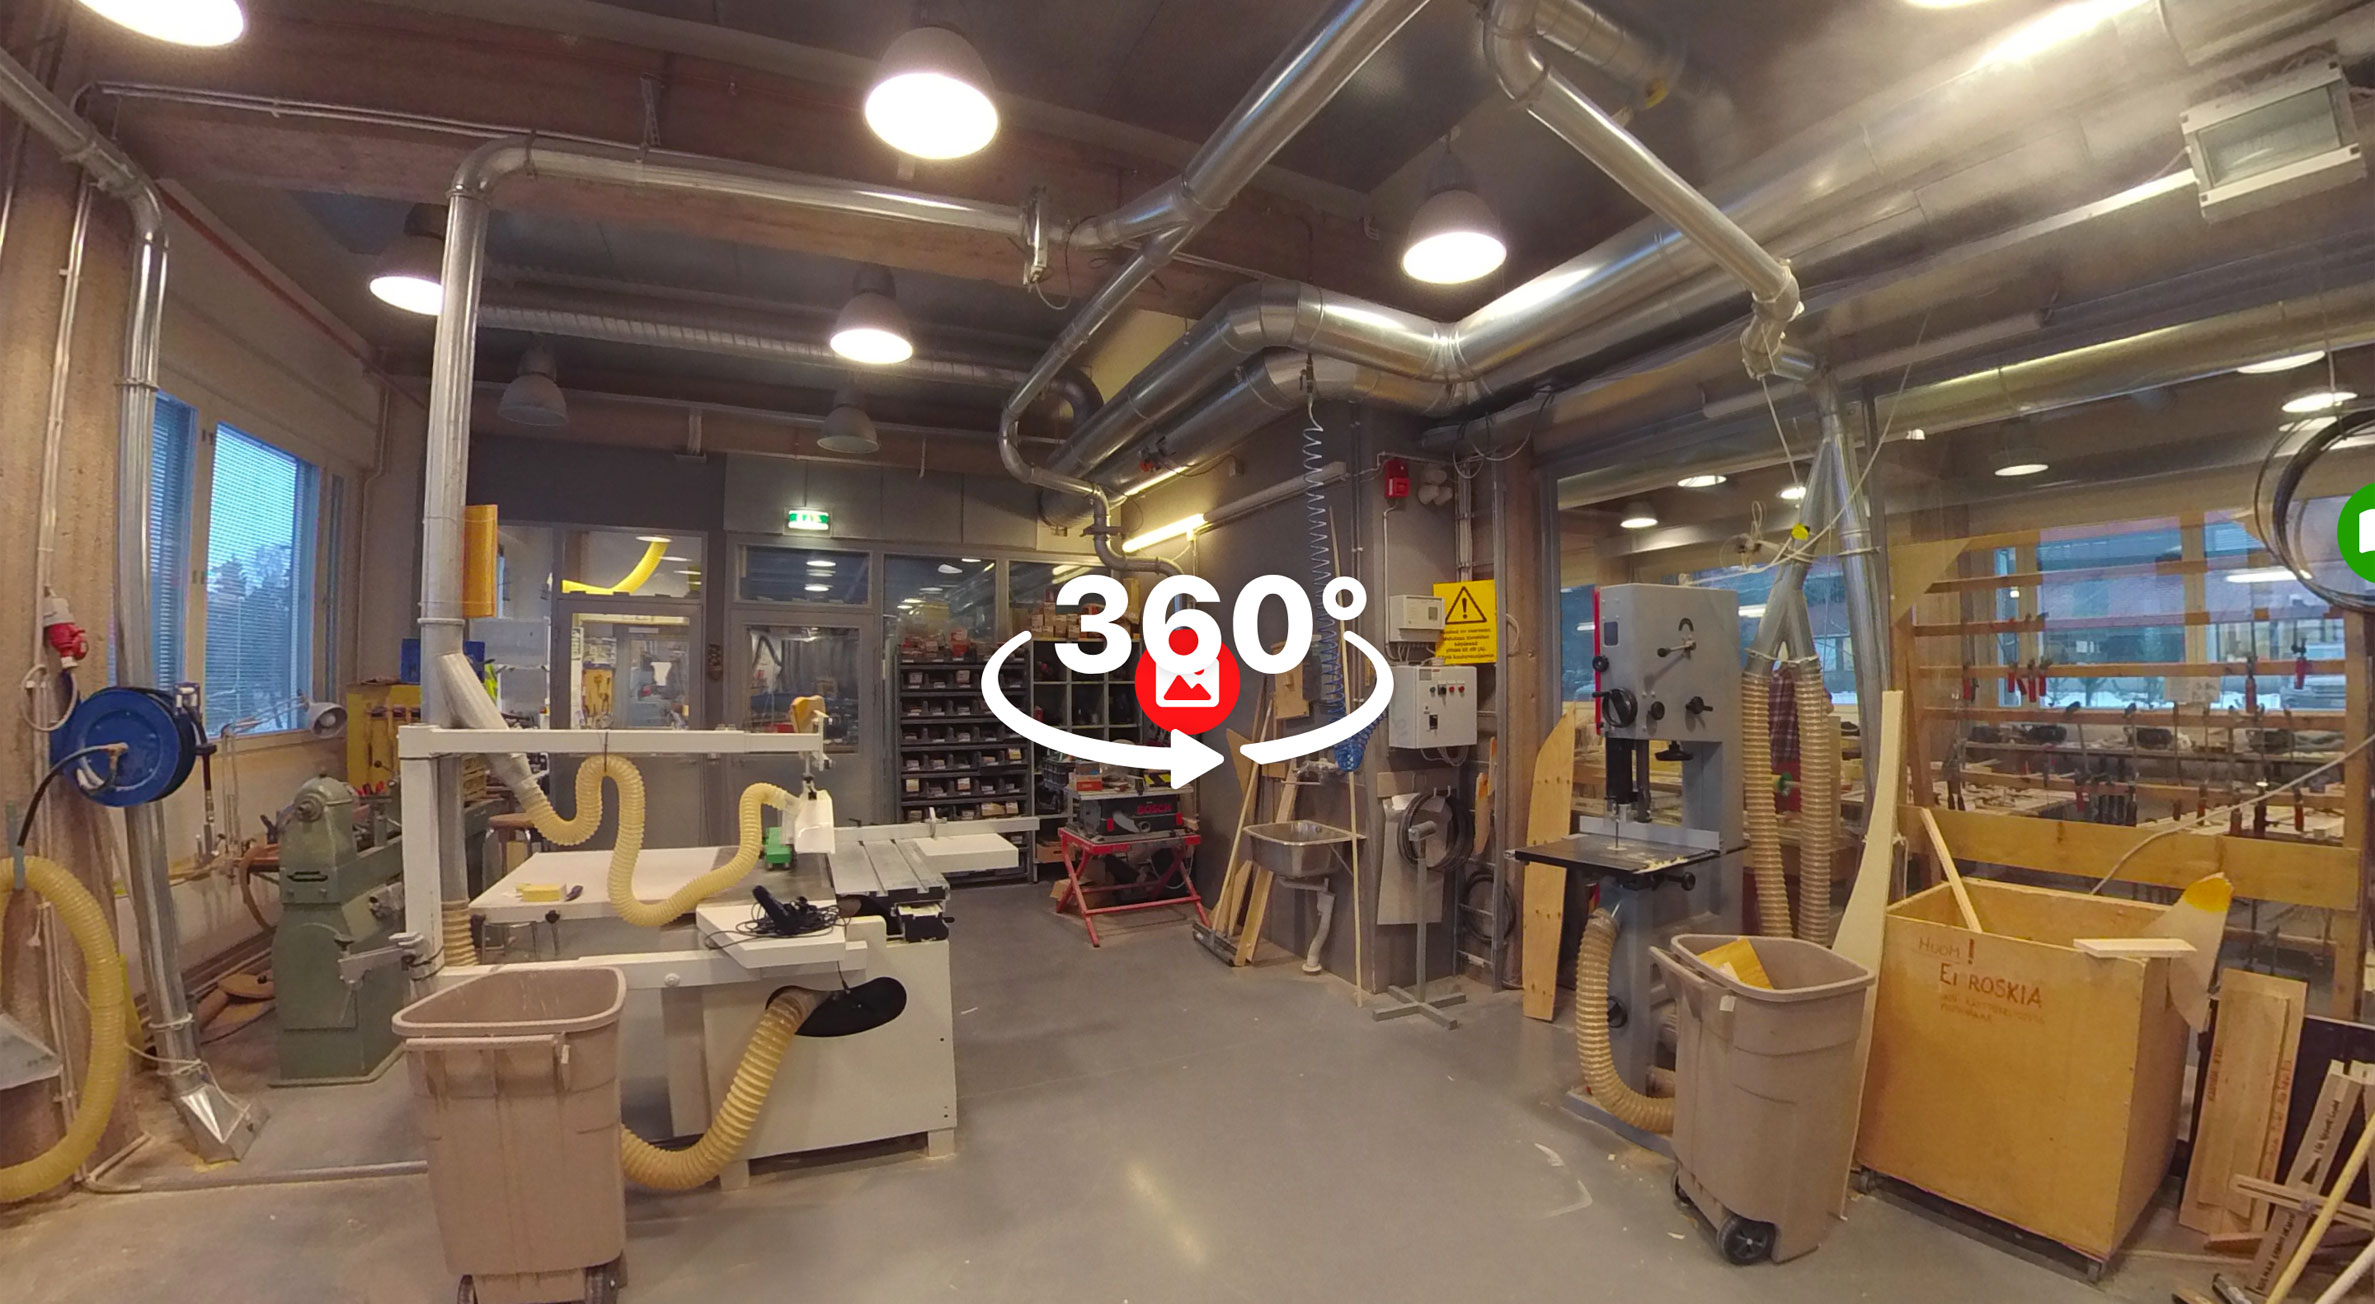 A screenshot of 360 degree picture showcasing a workshop environment.